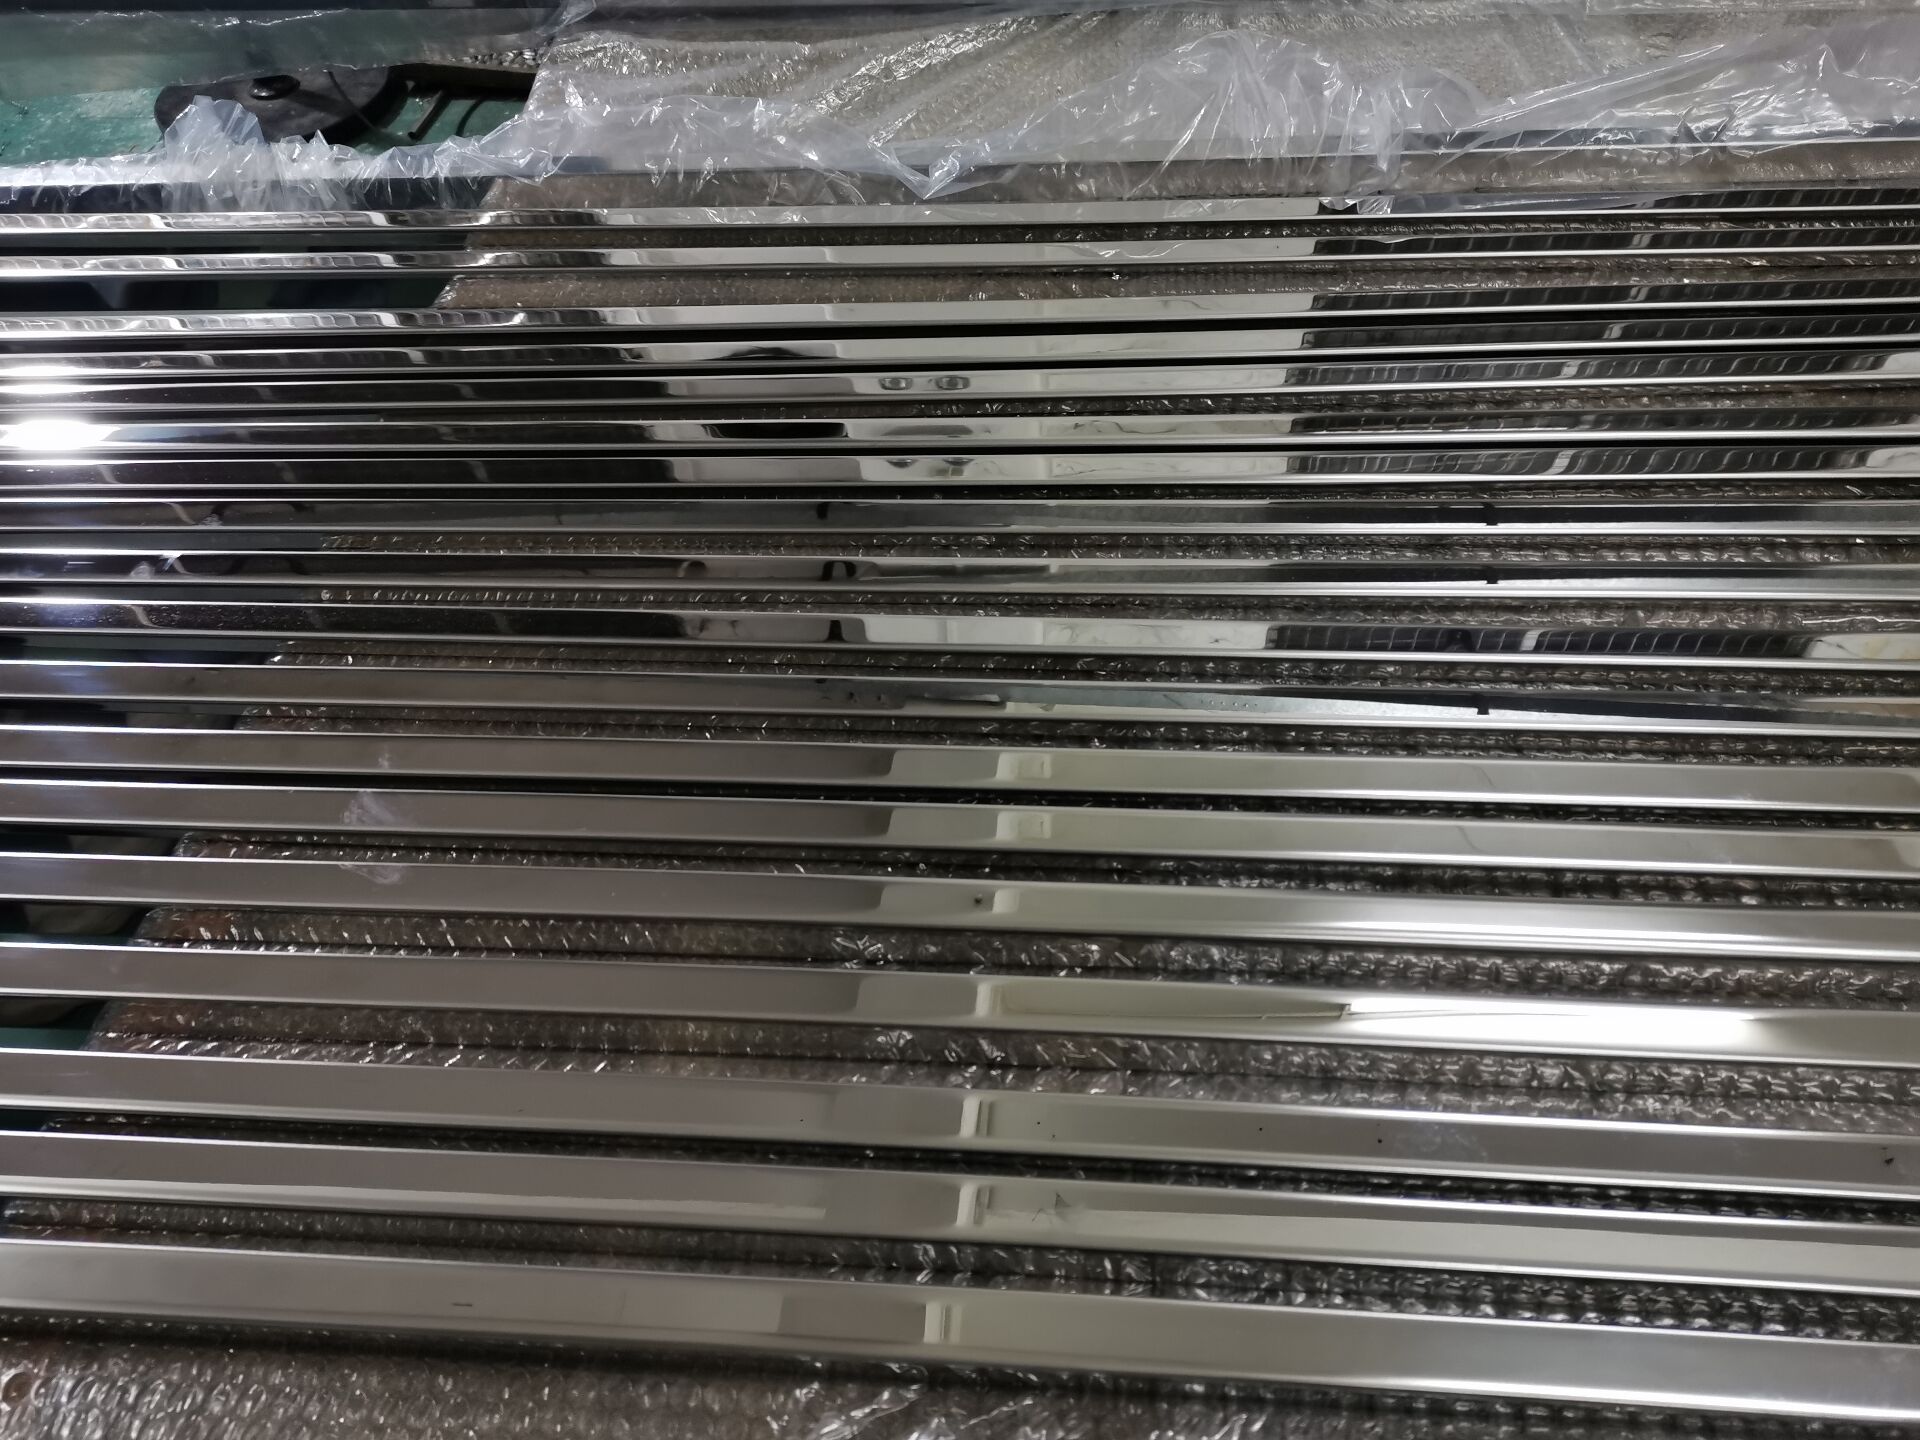 24x25mm square stainless steel U channel cap rail